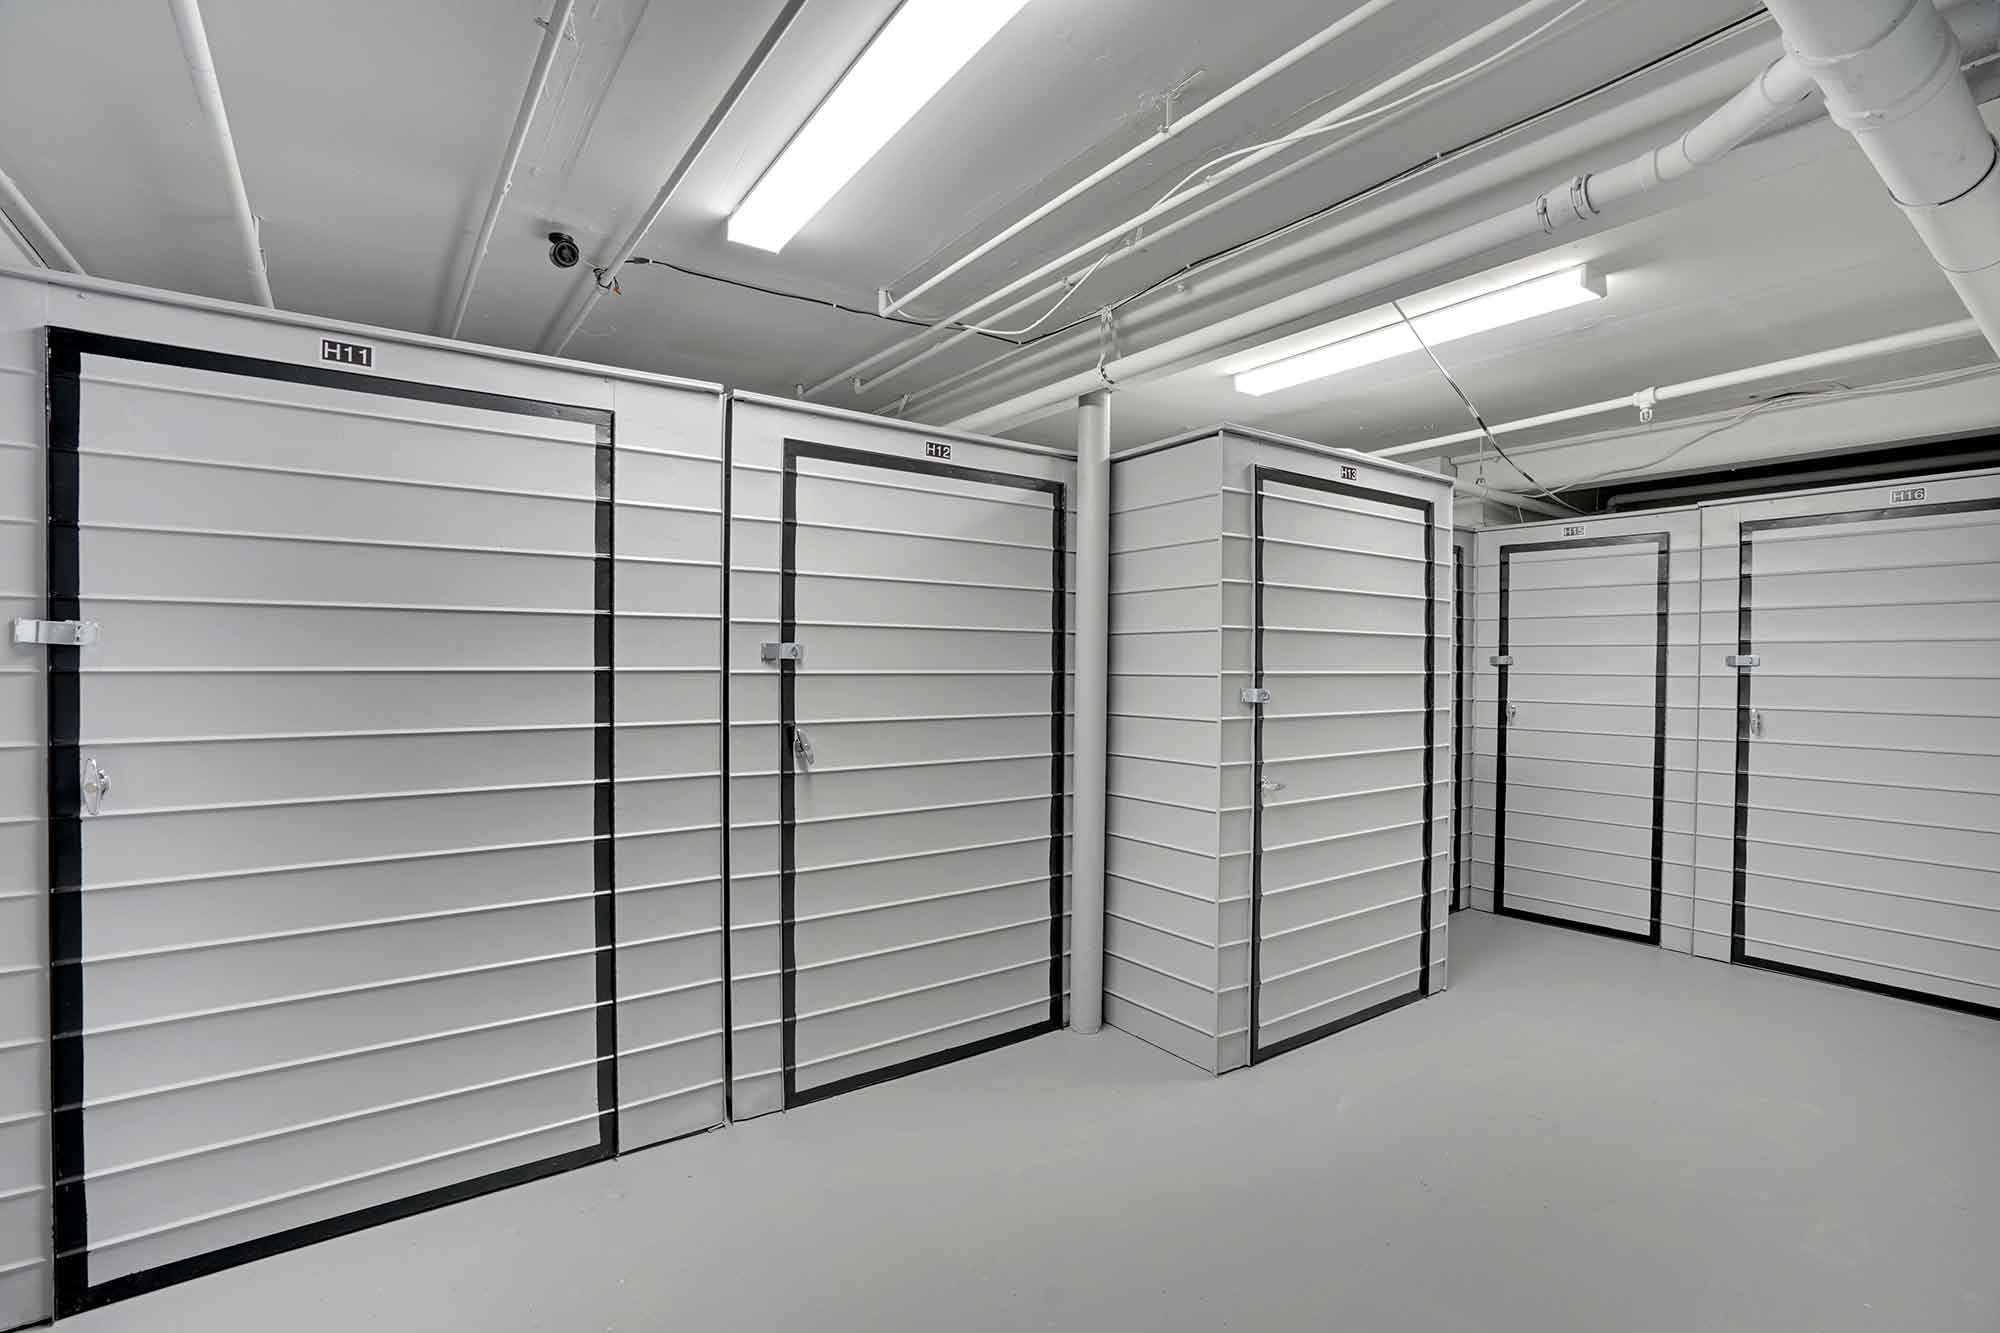 What Are The Benefits of Onsite Storage Solutions - residential storage units - maxspace storage